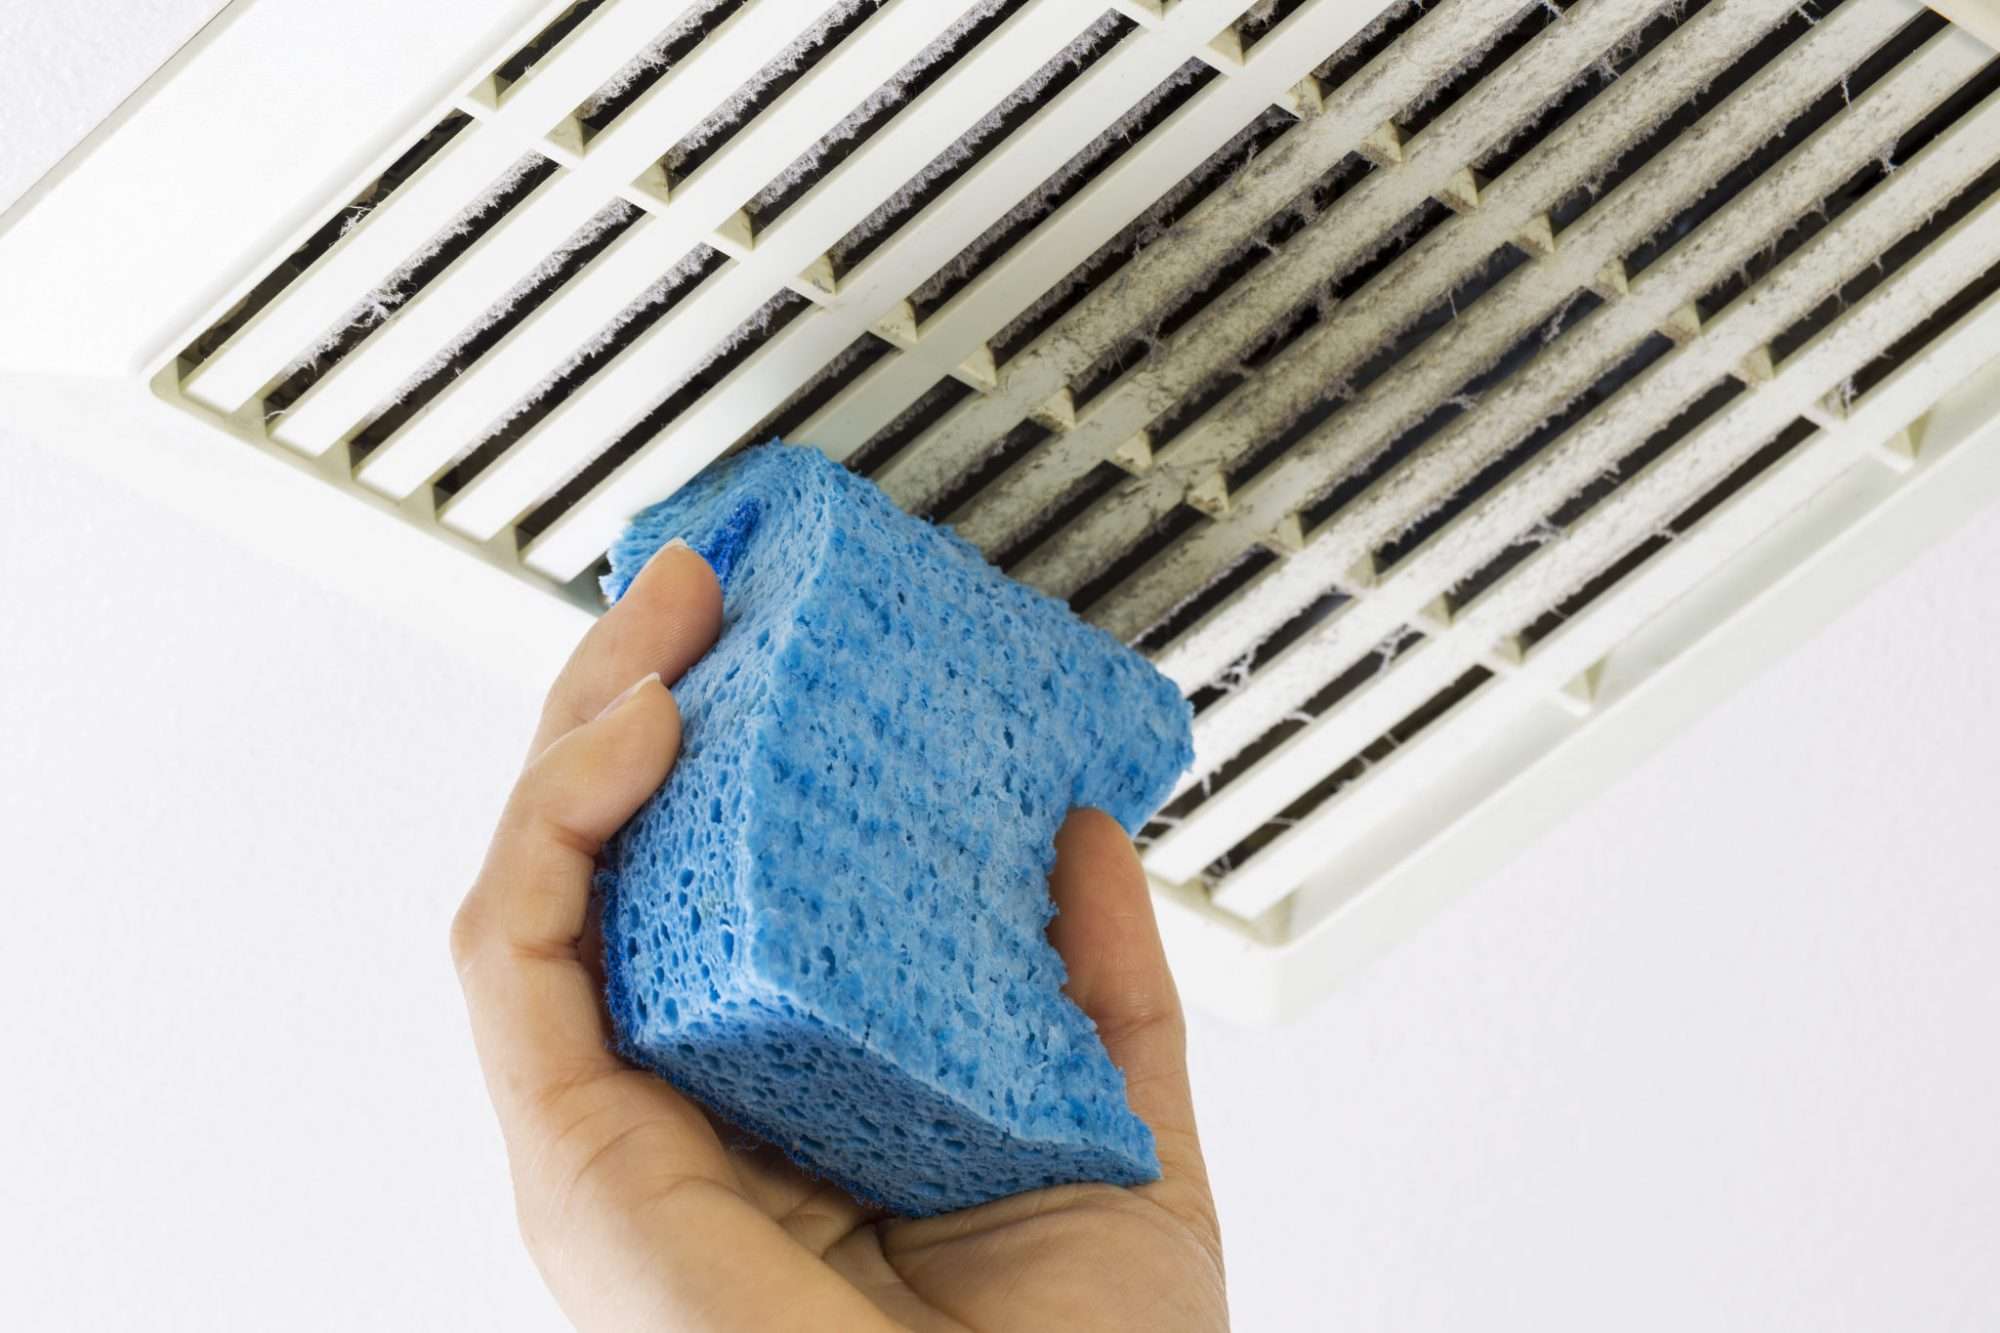 How To Install Filter Fresh On Your Home Air Conditioning Vent Air Filters  